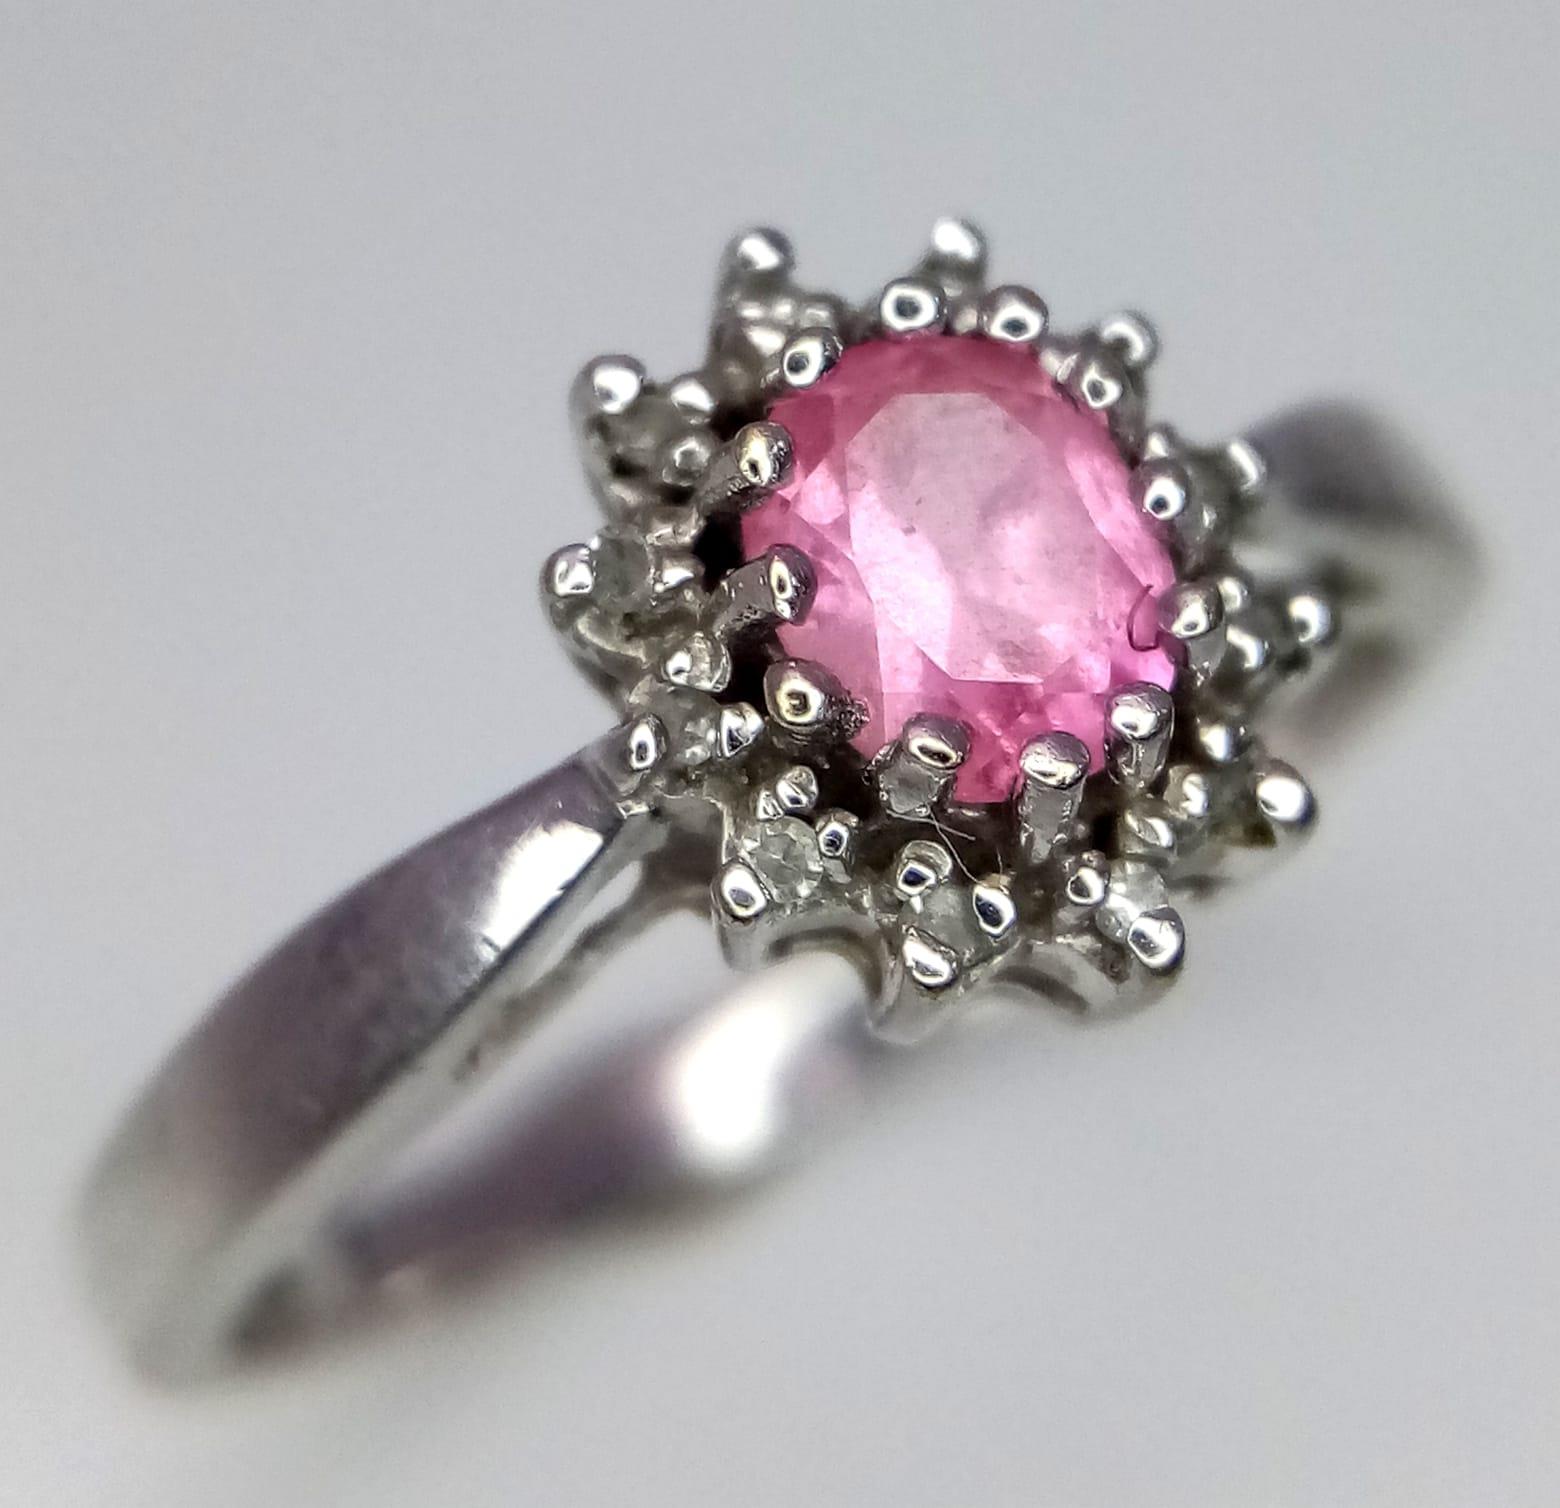 9k white gold diamond and pink sapphire ring. Weight: 2.2g Size: M (dia:0.12ct/sapp:0.40ct) - Image 2 of 4